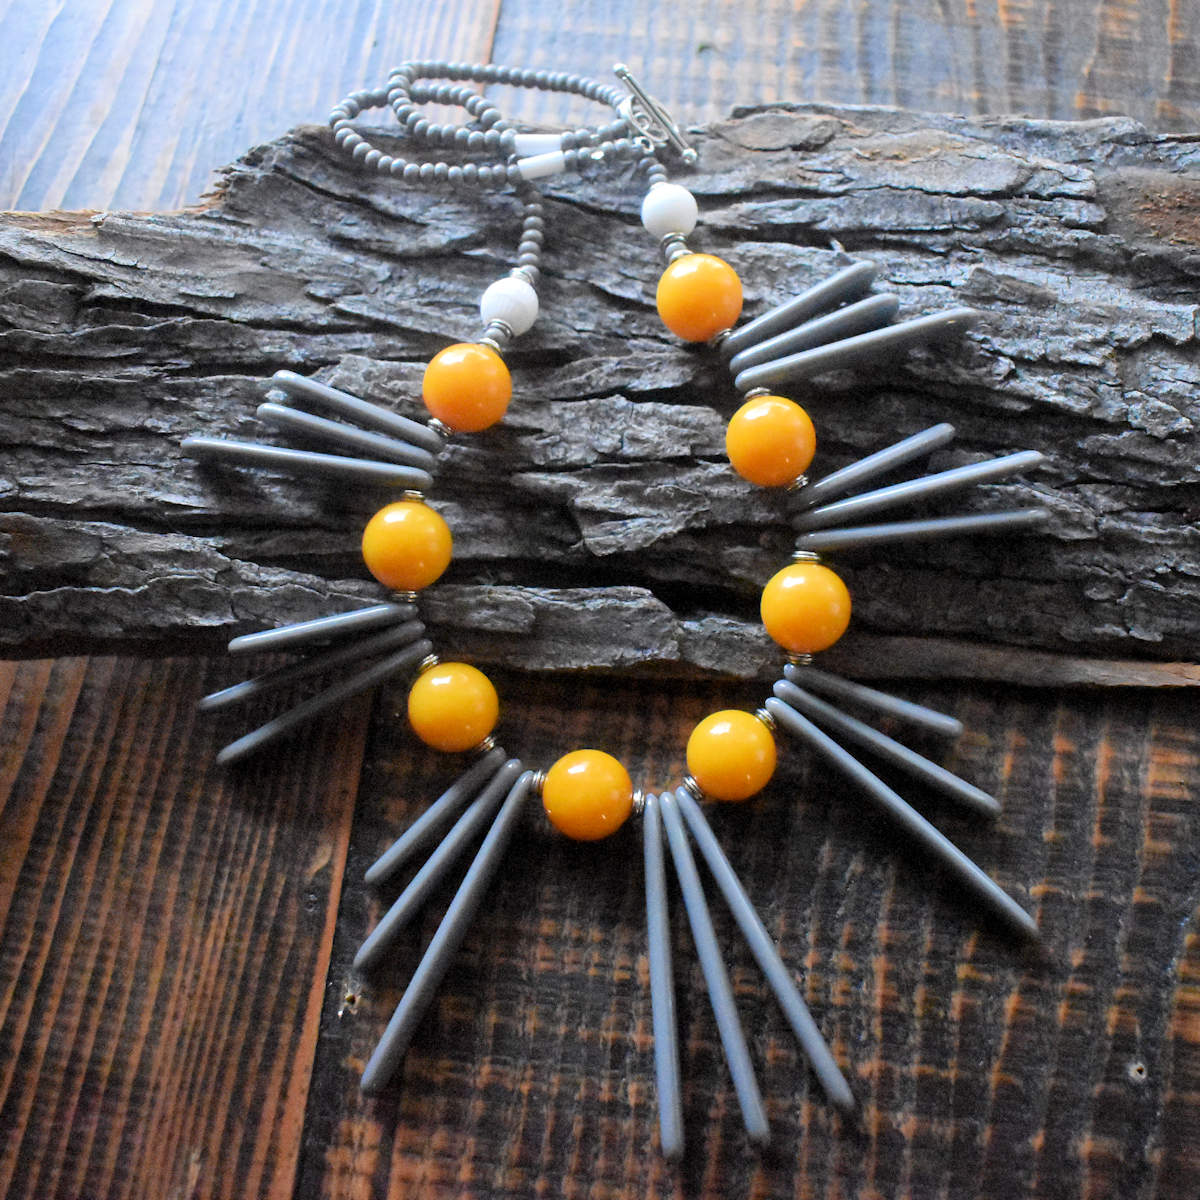 A necklace with seven clusters of long gray spines alternating with warm yellow beads is draped across a wood background. The back part of the necklace has chunky gray seed beads and a silver toggle clasp.